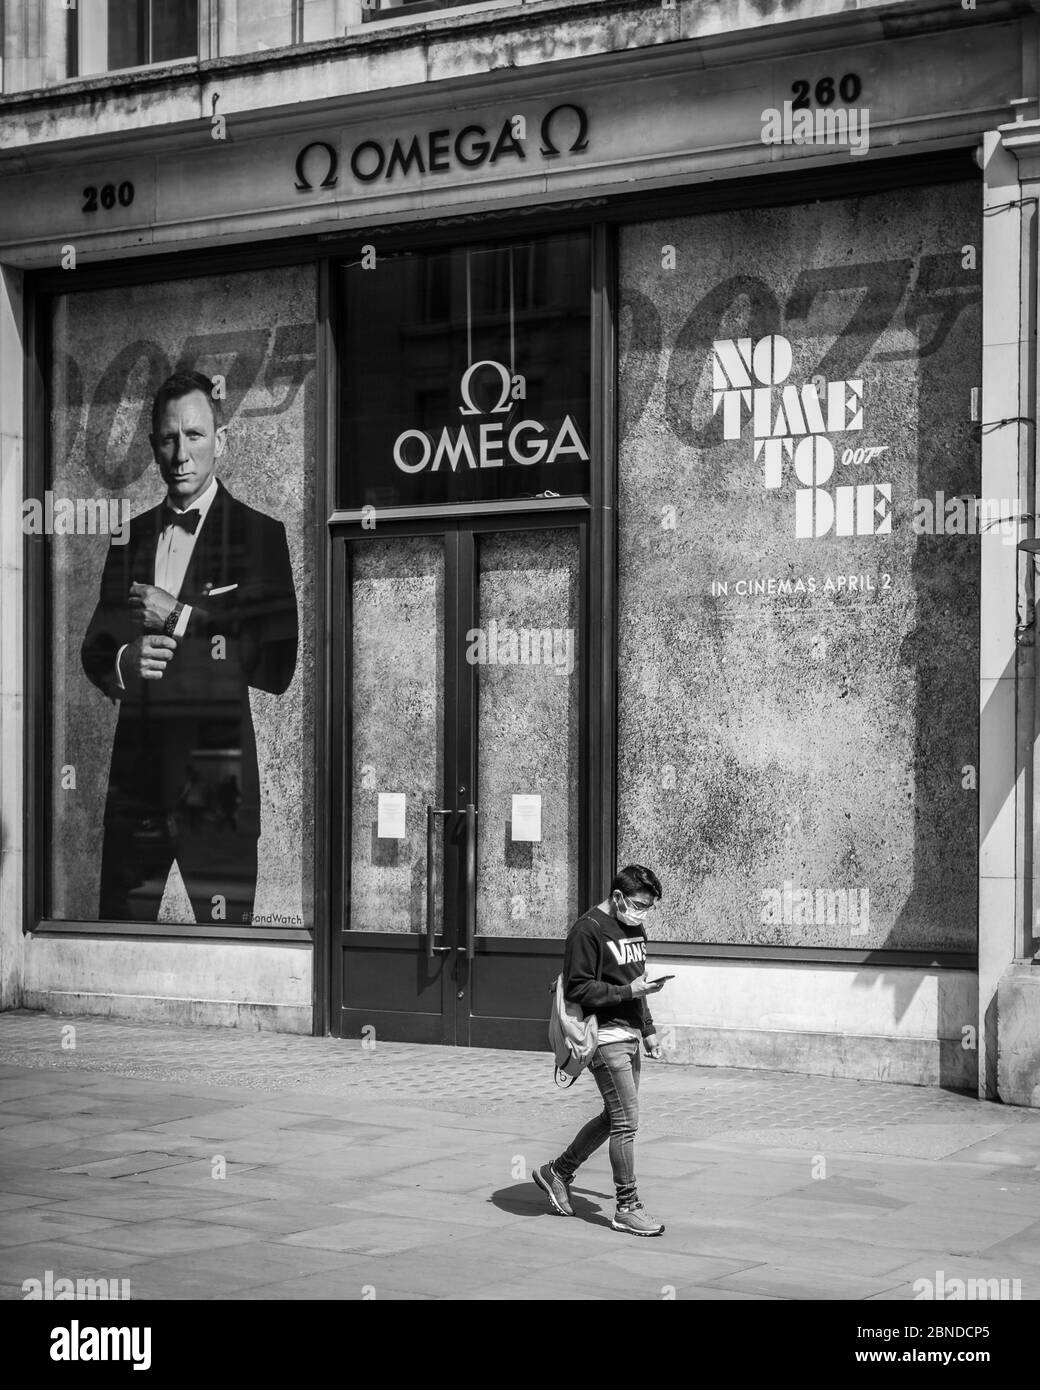 Monochrome image of a person in a face mask by the 'No Time To Die' James Bond sign on a deserted Regent Street in London during the lockdown. Stock Photo